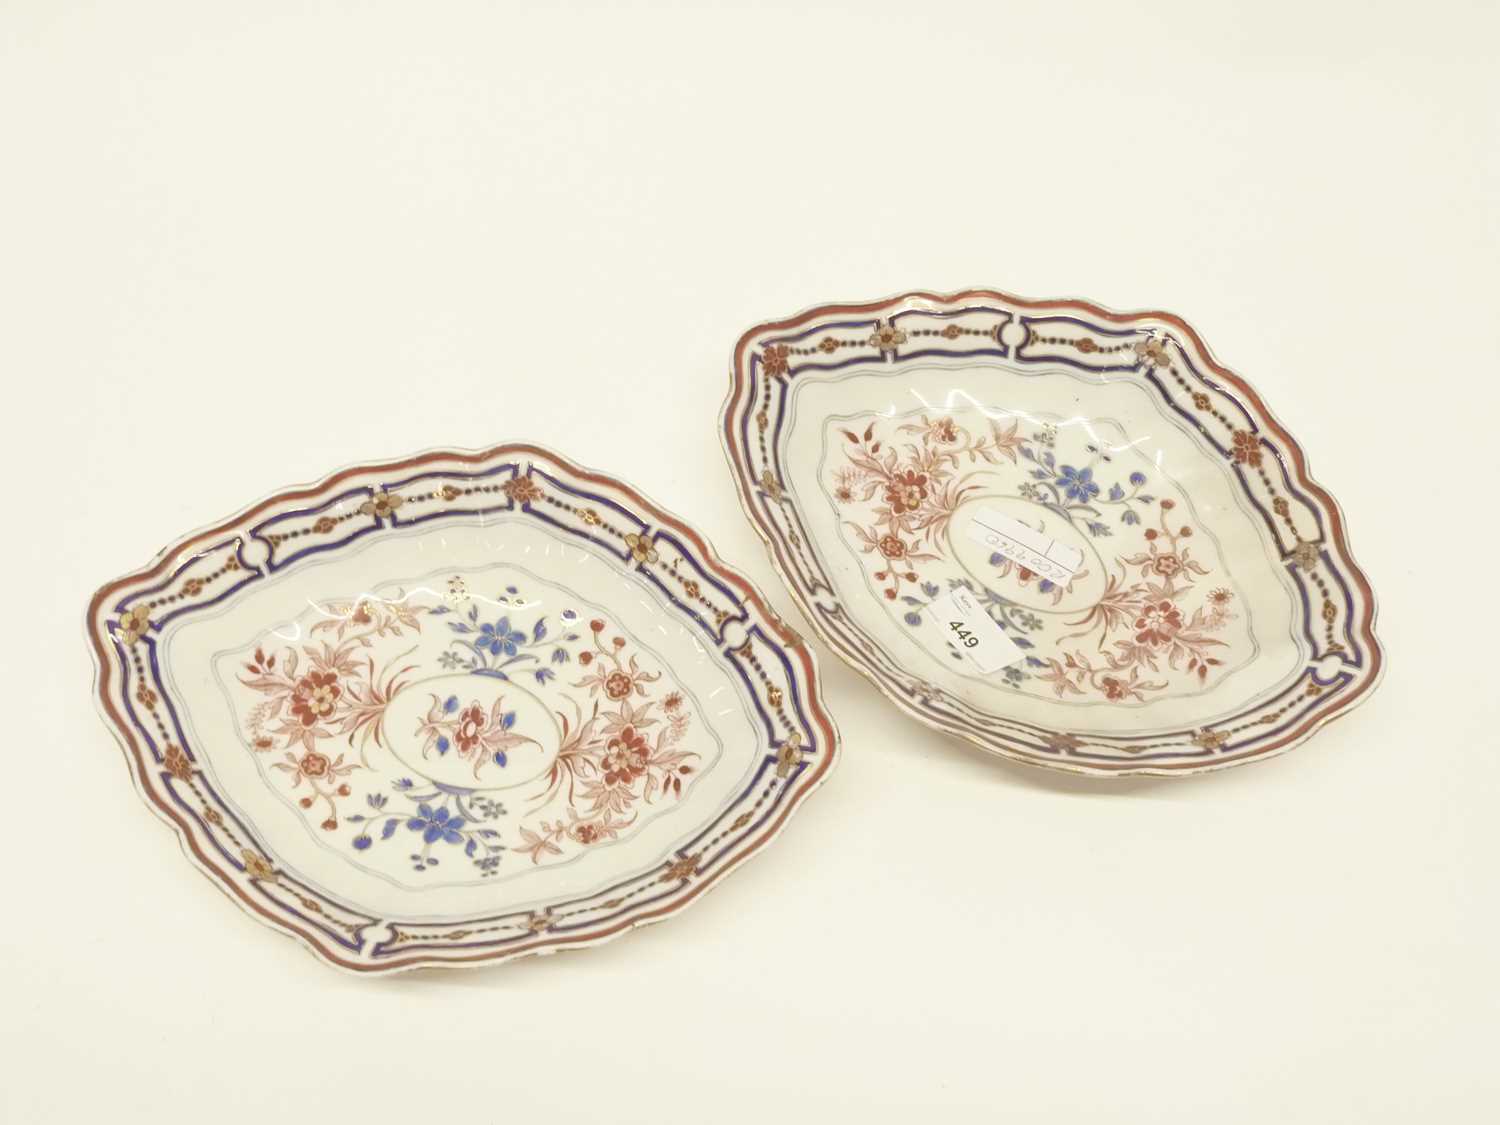 Two late 18th Century Derby porcelain dishes of oval shape with shaped rims, decorated in iron red